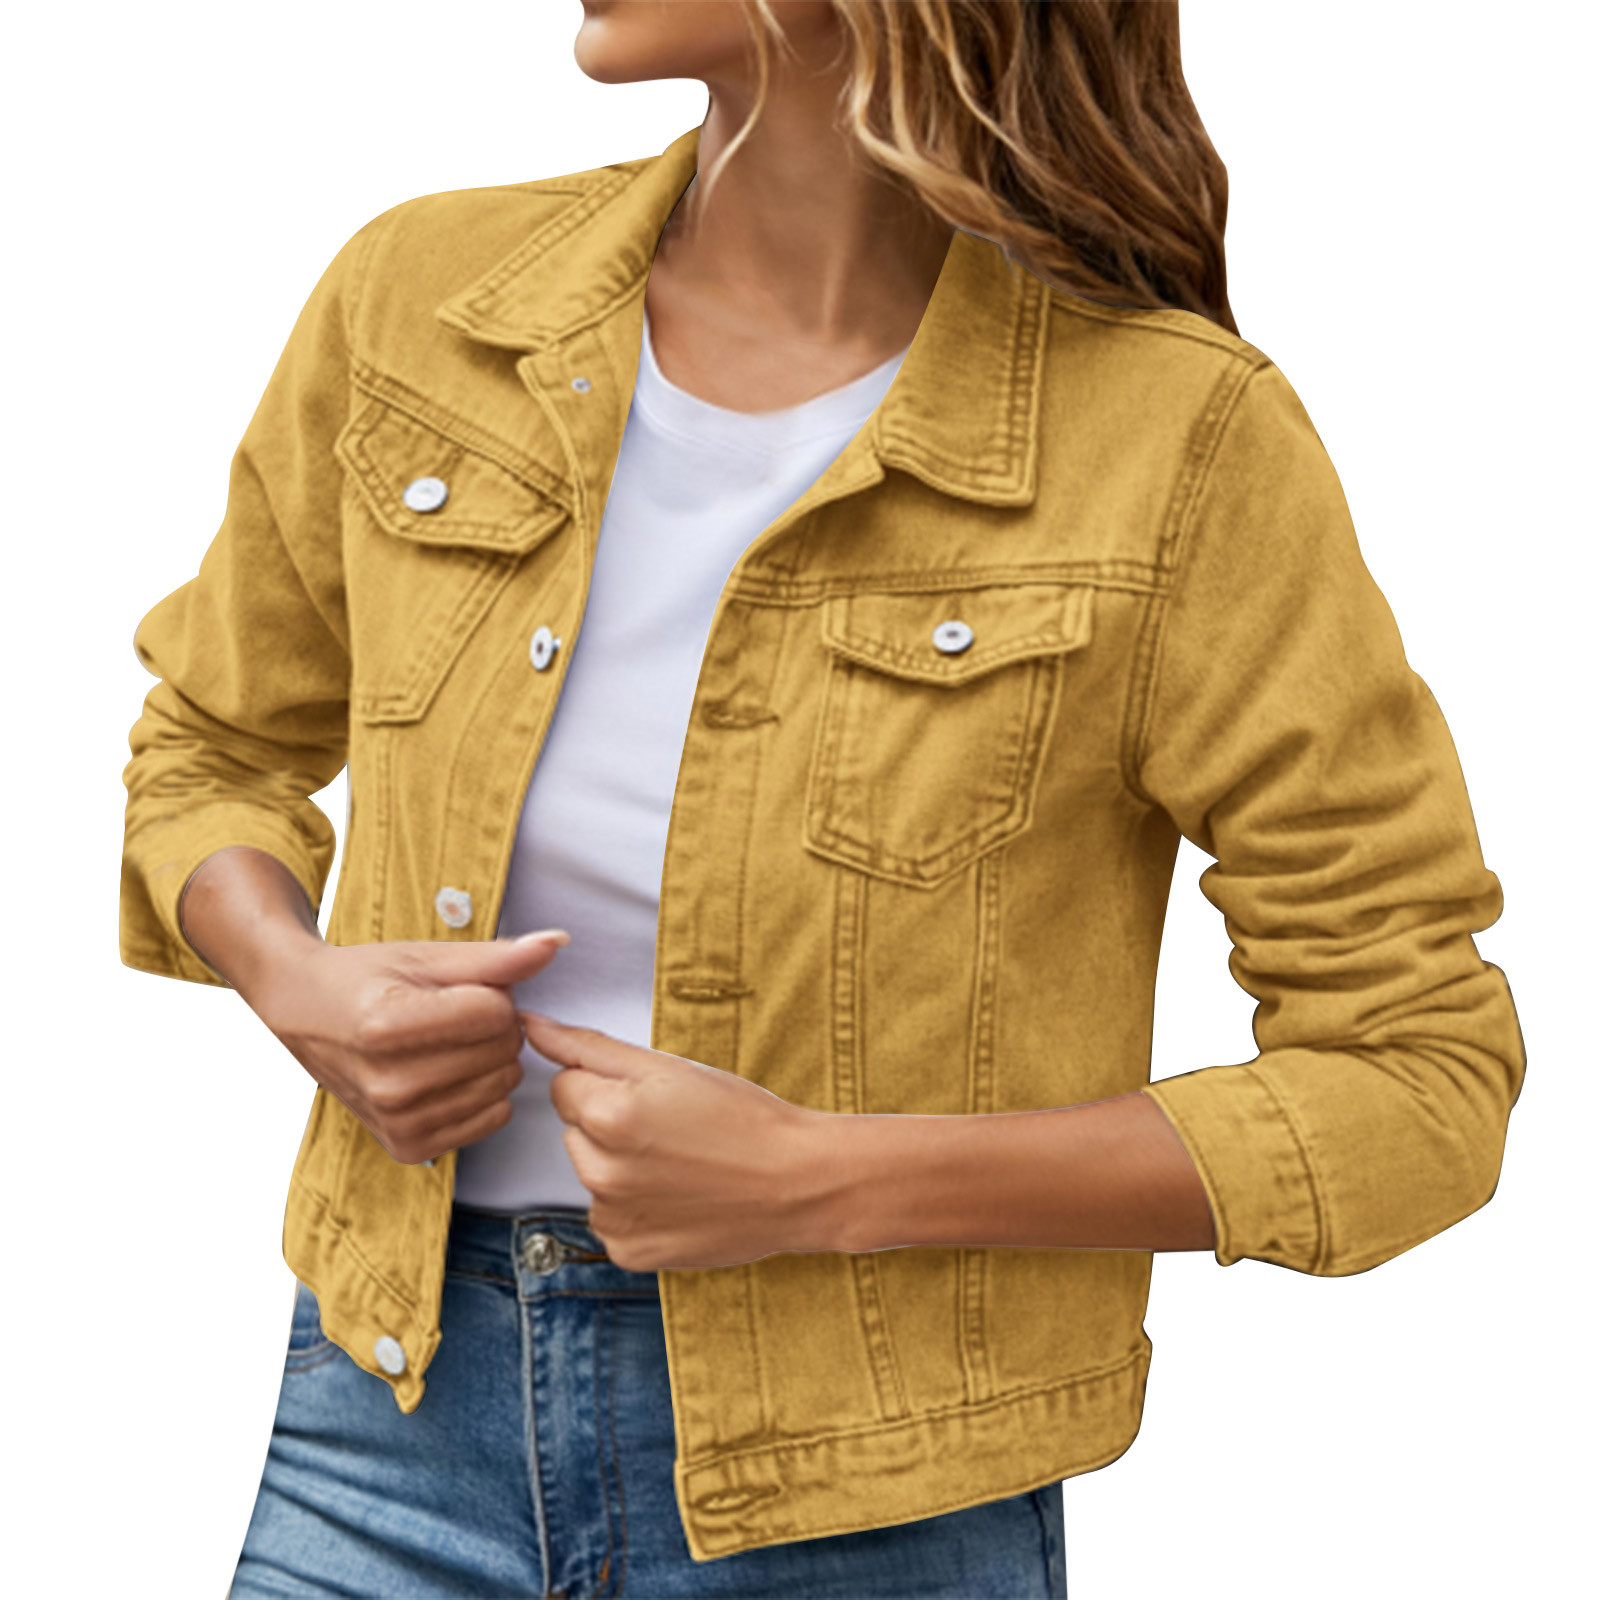 iOPQO womens sweaters Women's Basic Solid Color Button Down Denim Cotton Jacket With Pockets Denim Jacket Coat Women's Denim Jackets Yellow M - image 1 of 8